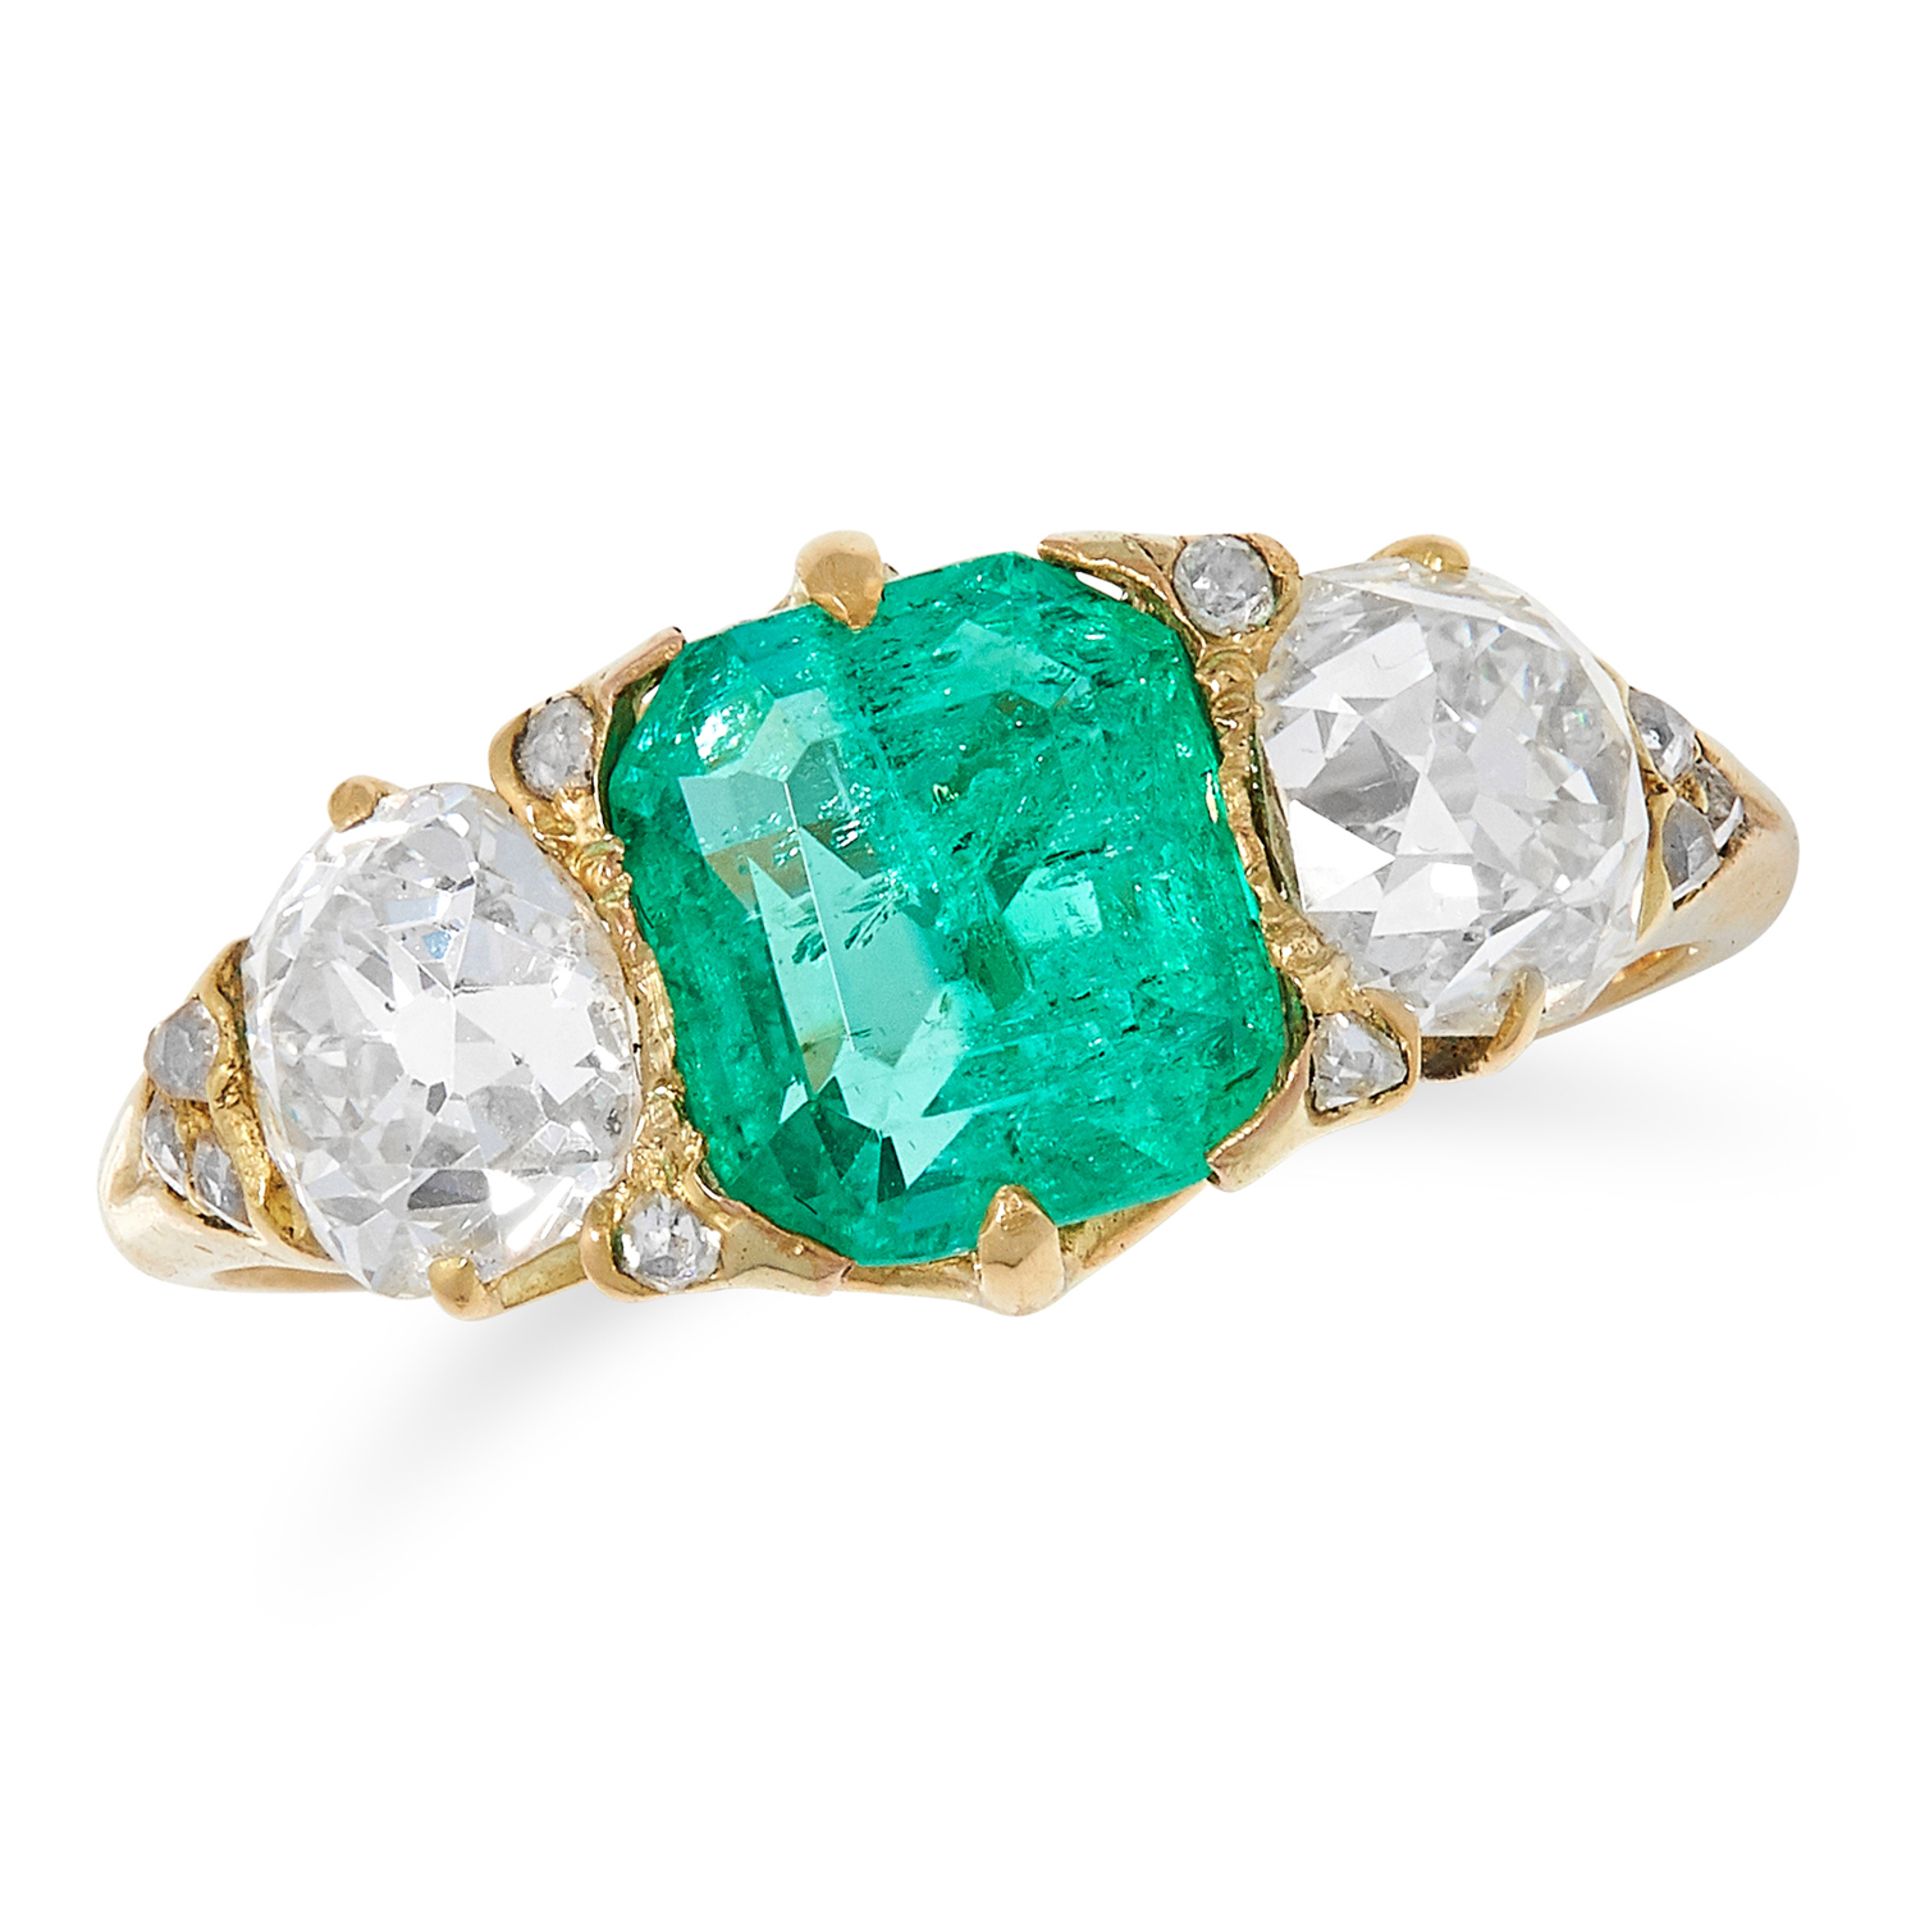 1.71 CARAT COLOMBIAN EMERALD AND DIAMOND THREE STONE RING set with an emerald cut emerald of 2.72